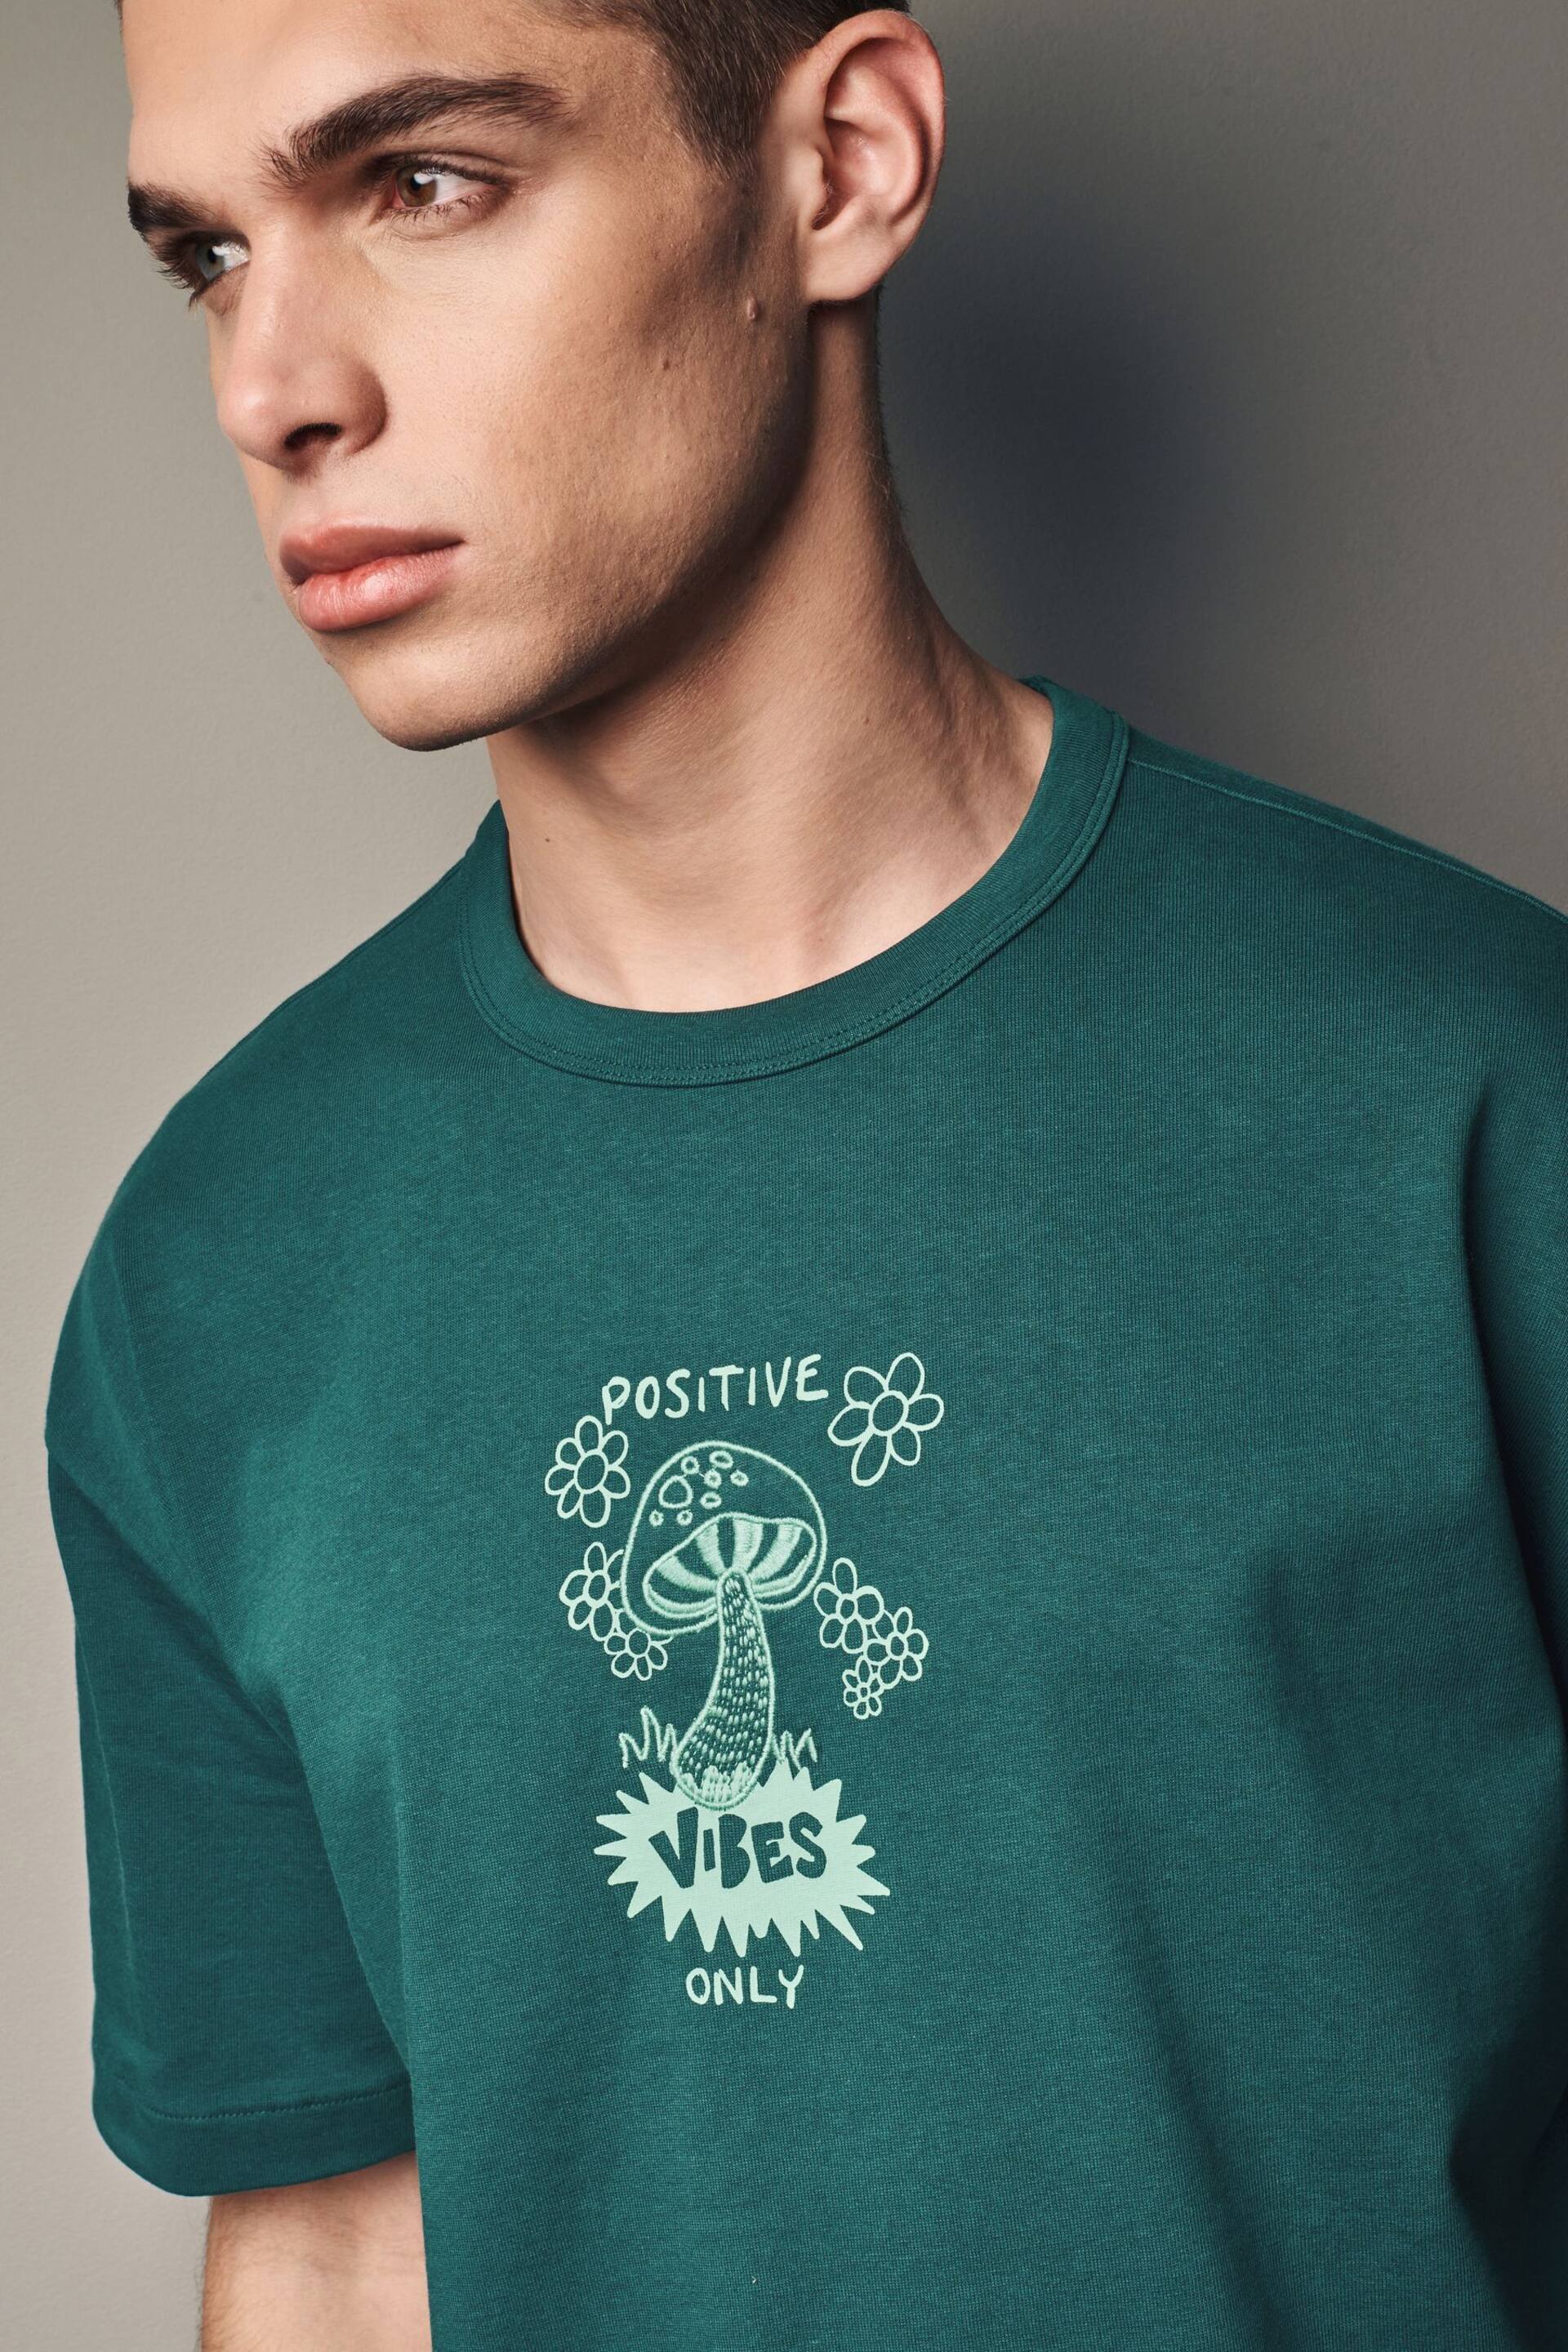 Green Mushroom Relaxed Fit Floral Nature Graphic T-Shirt - Image 4 of 6